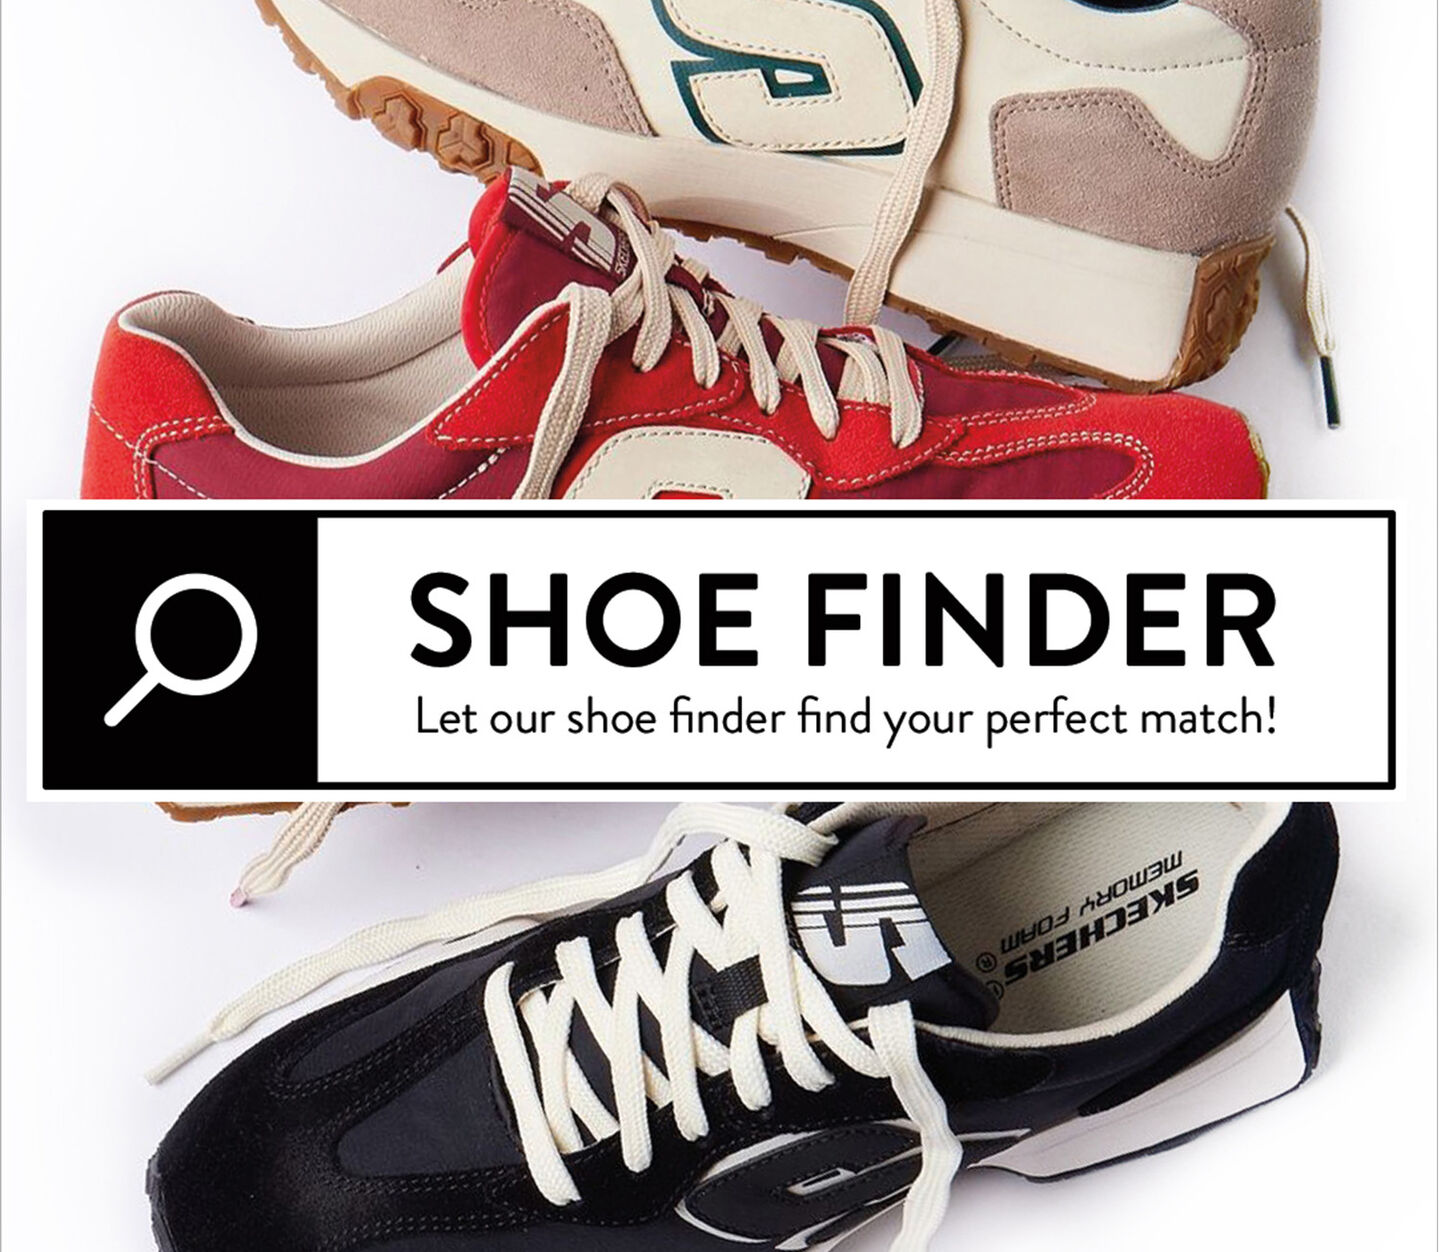 shoe finder - find your perfect match image